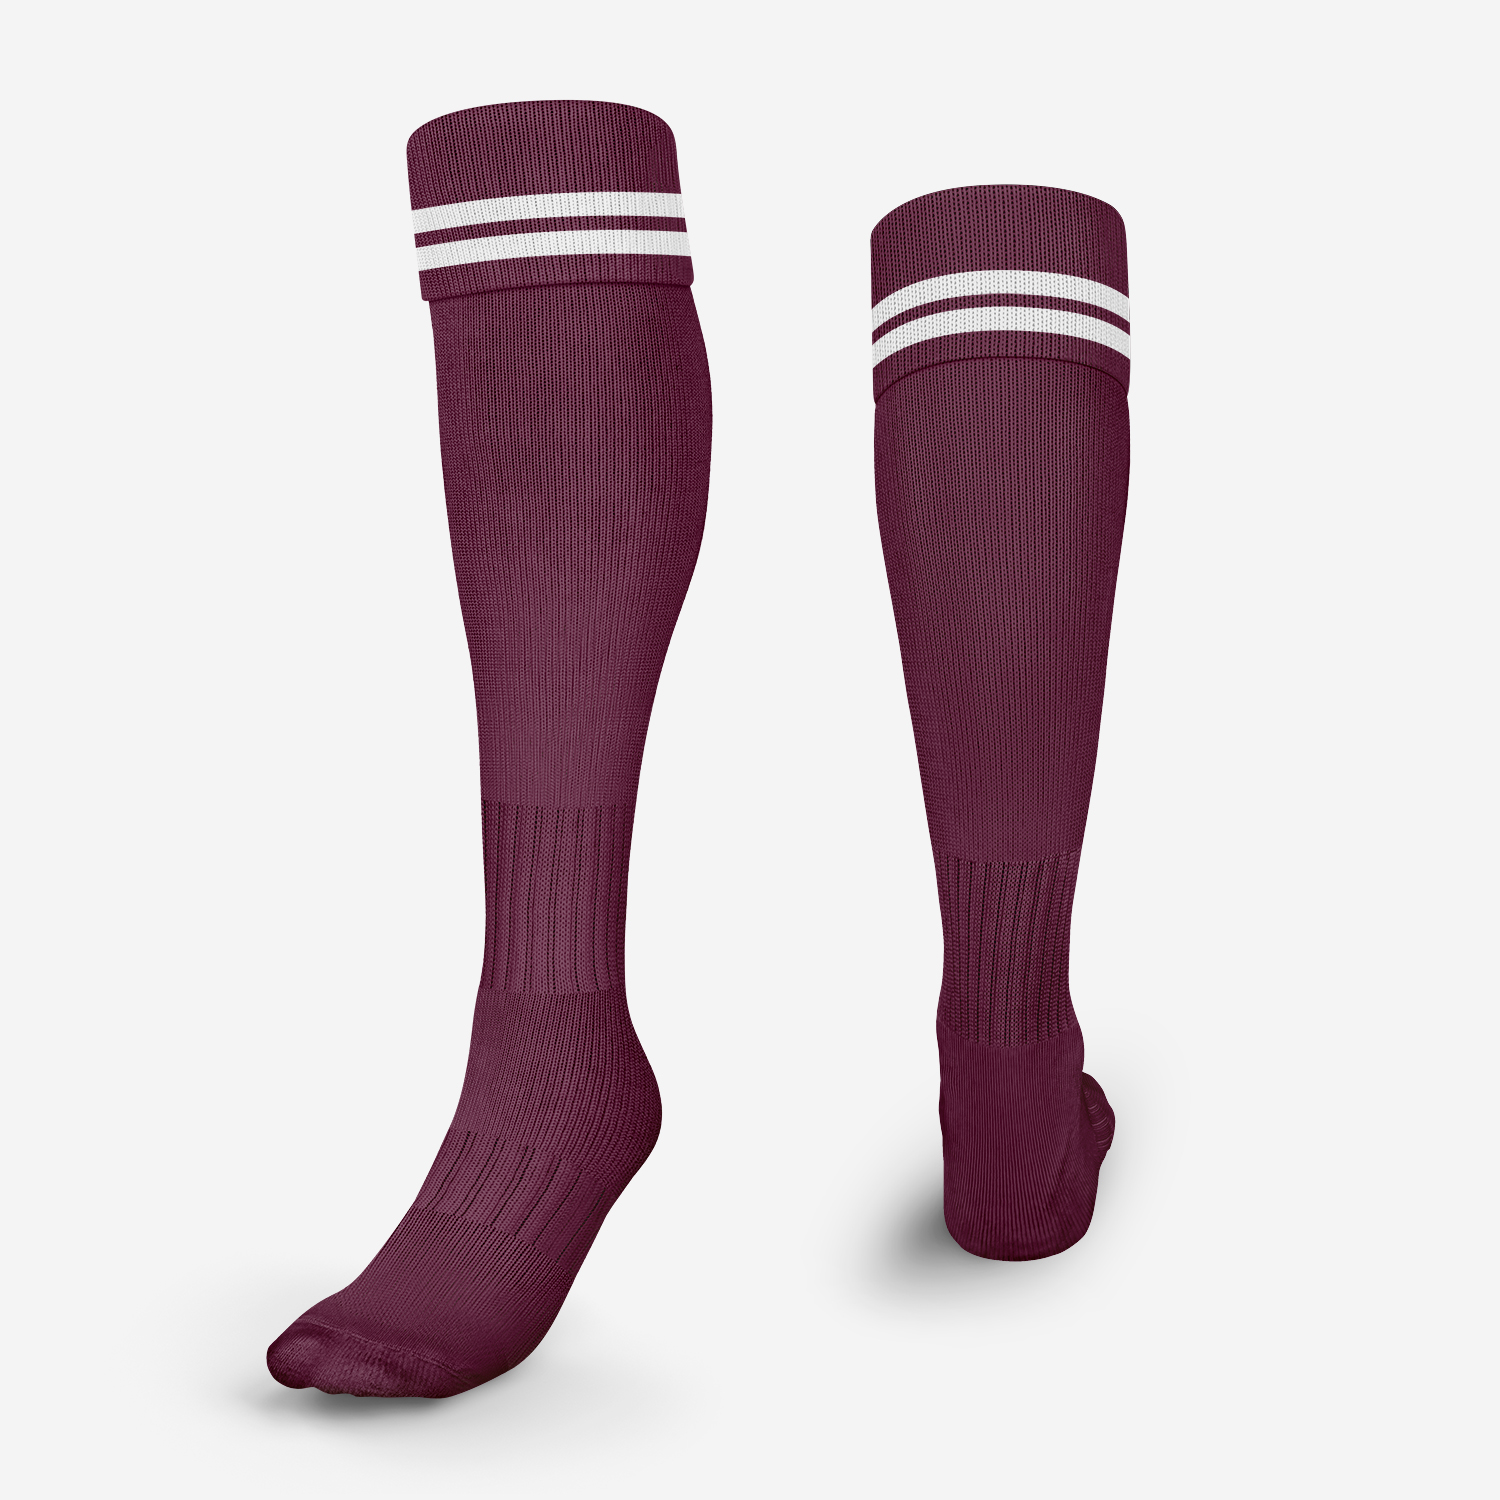 Manly Sea Eagles youth socks